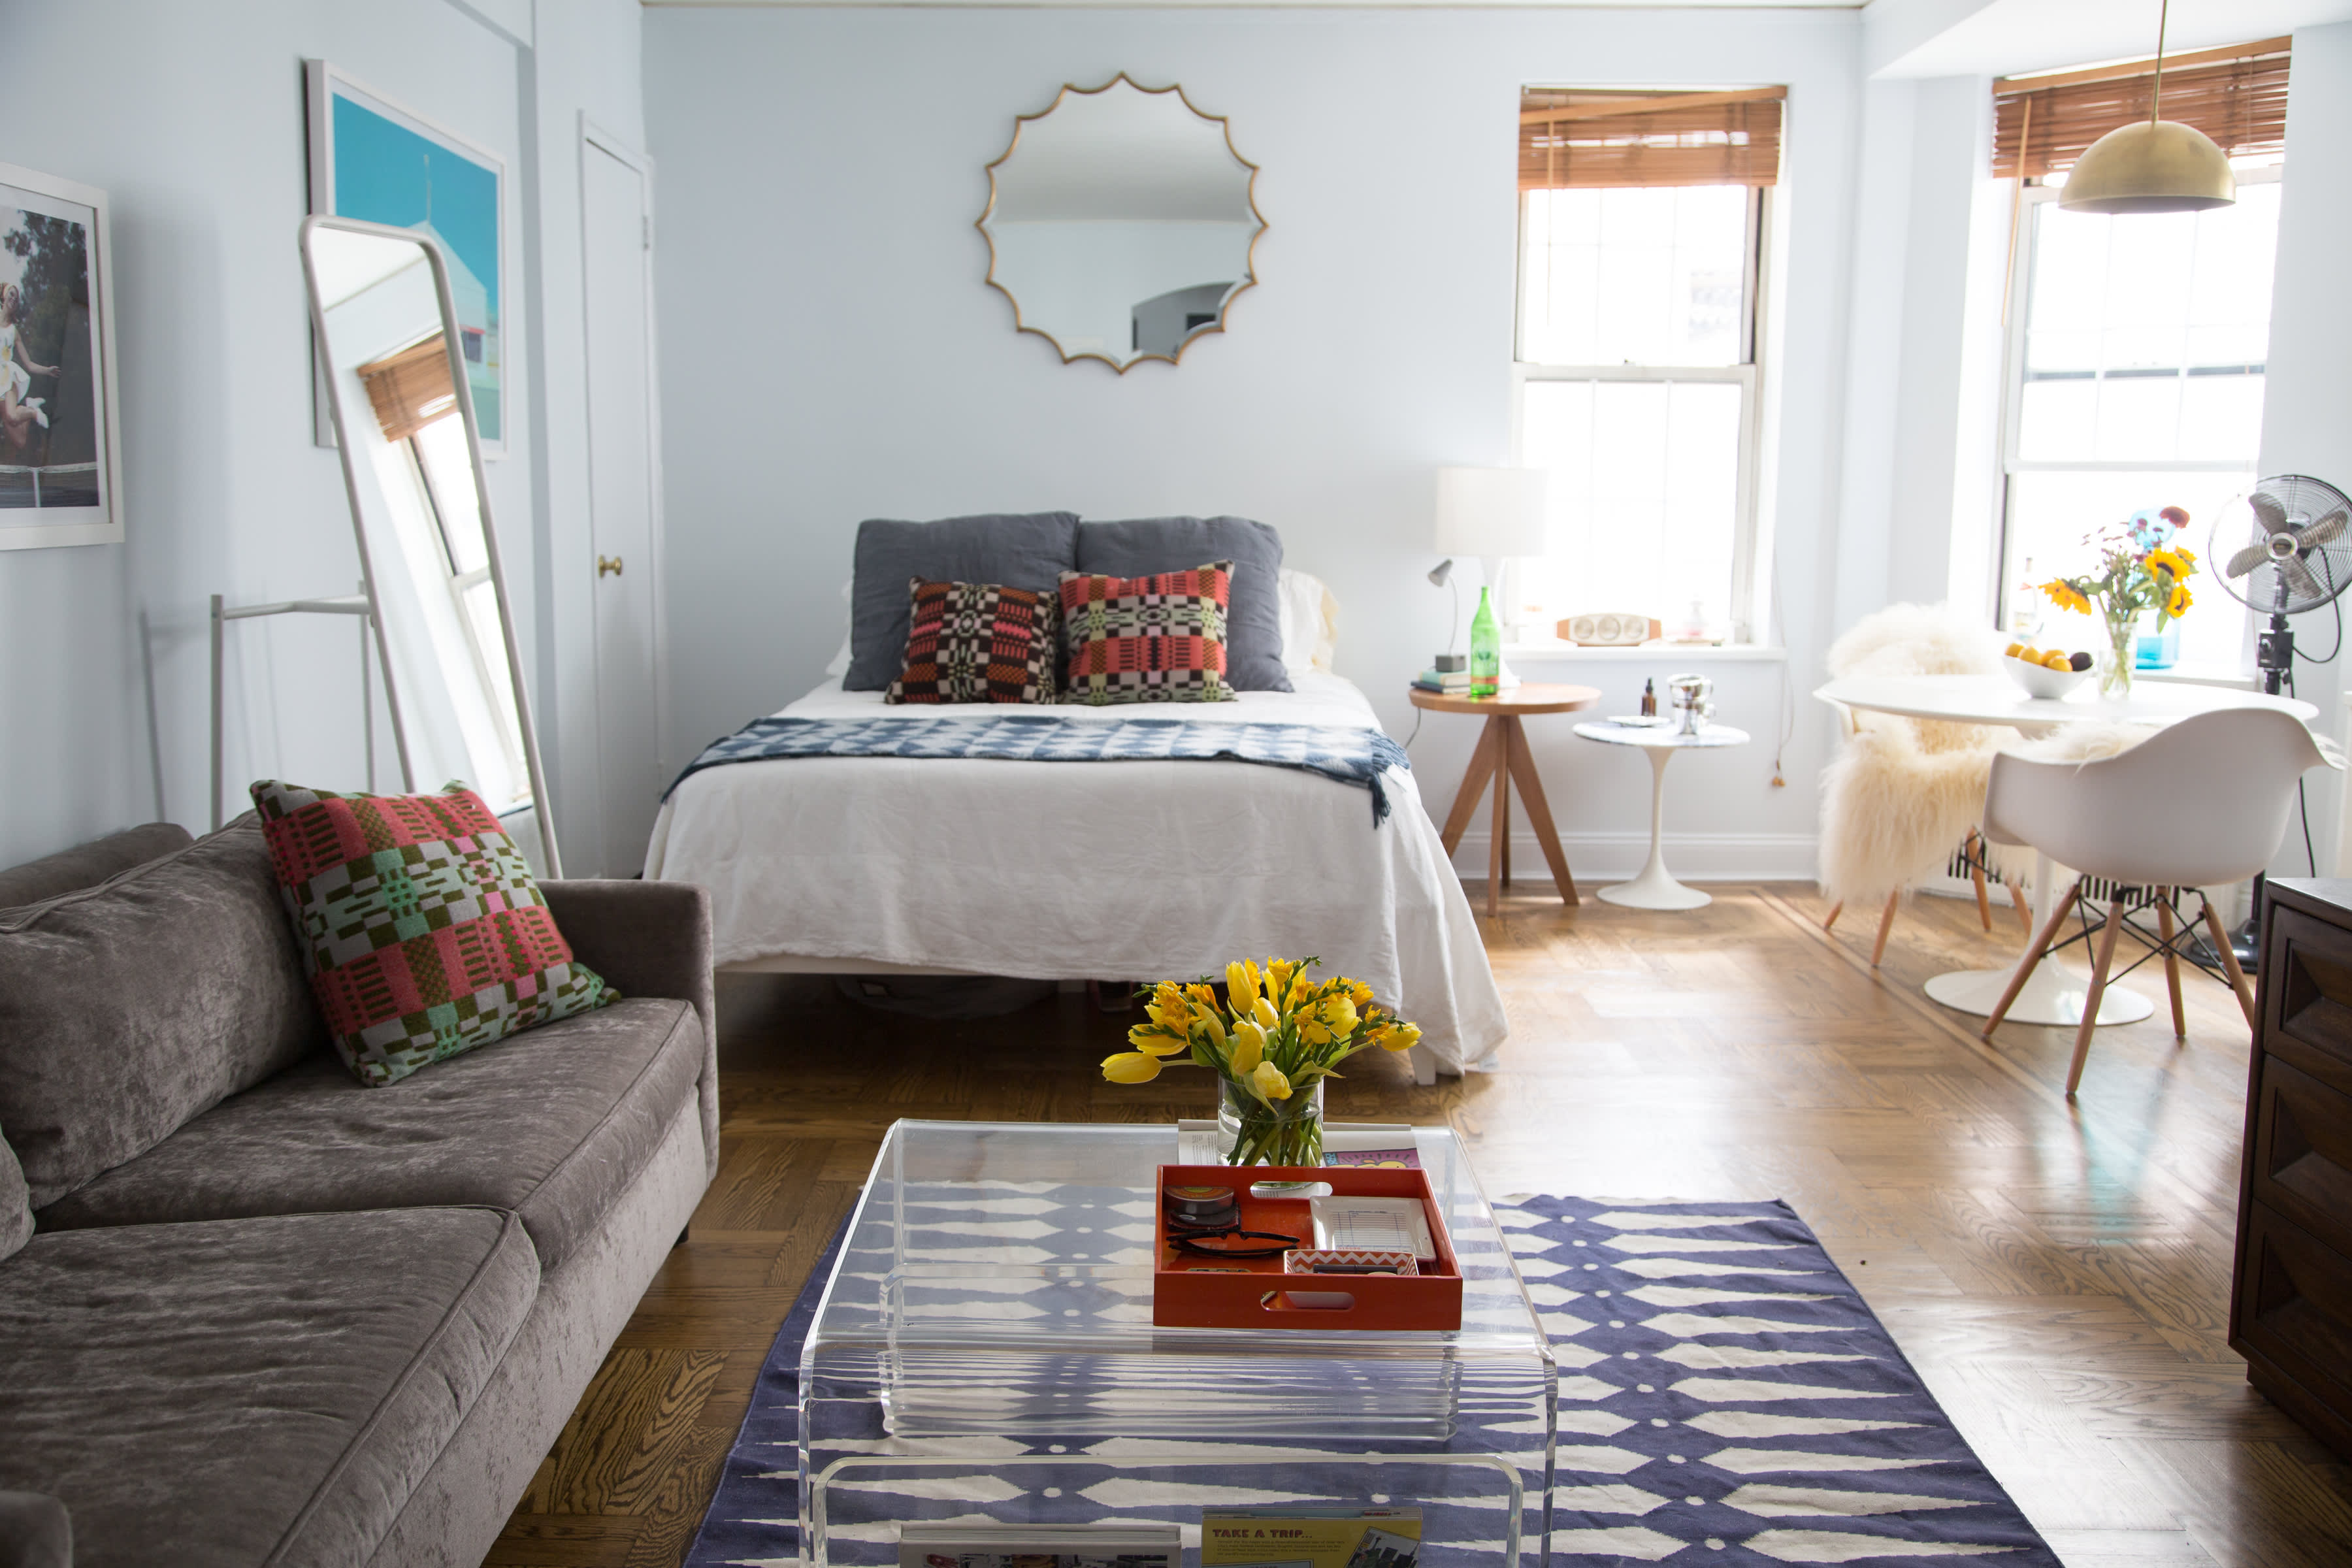 House Tour: A Colorful 450 Square Foot NYC Studio ...